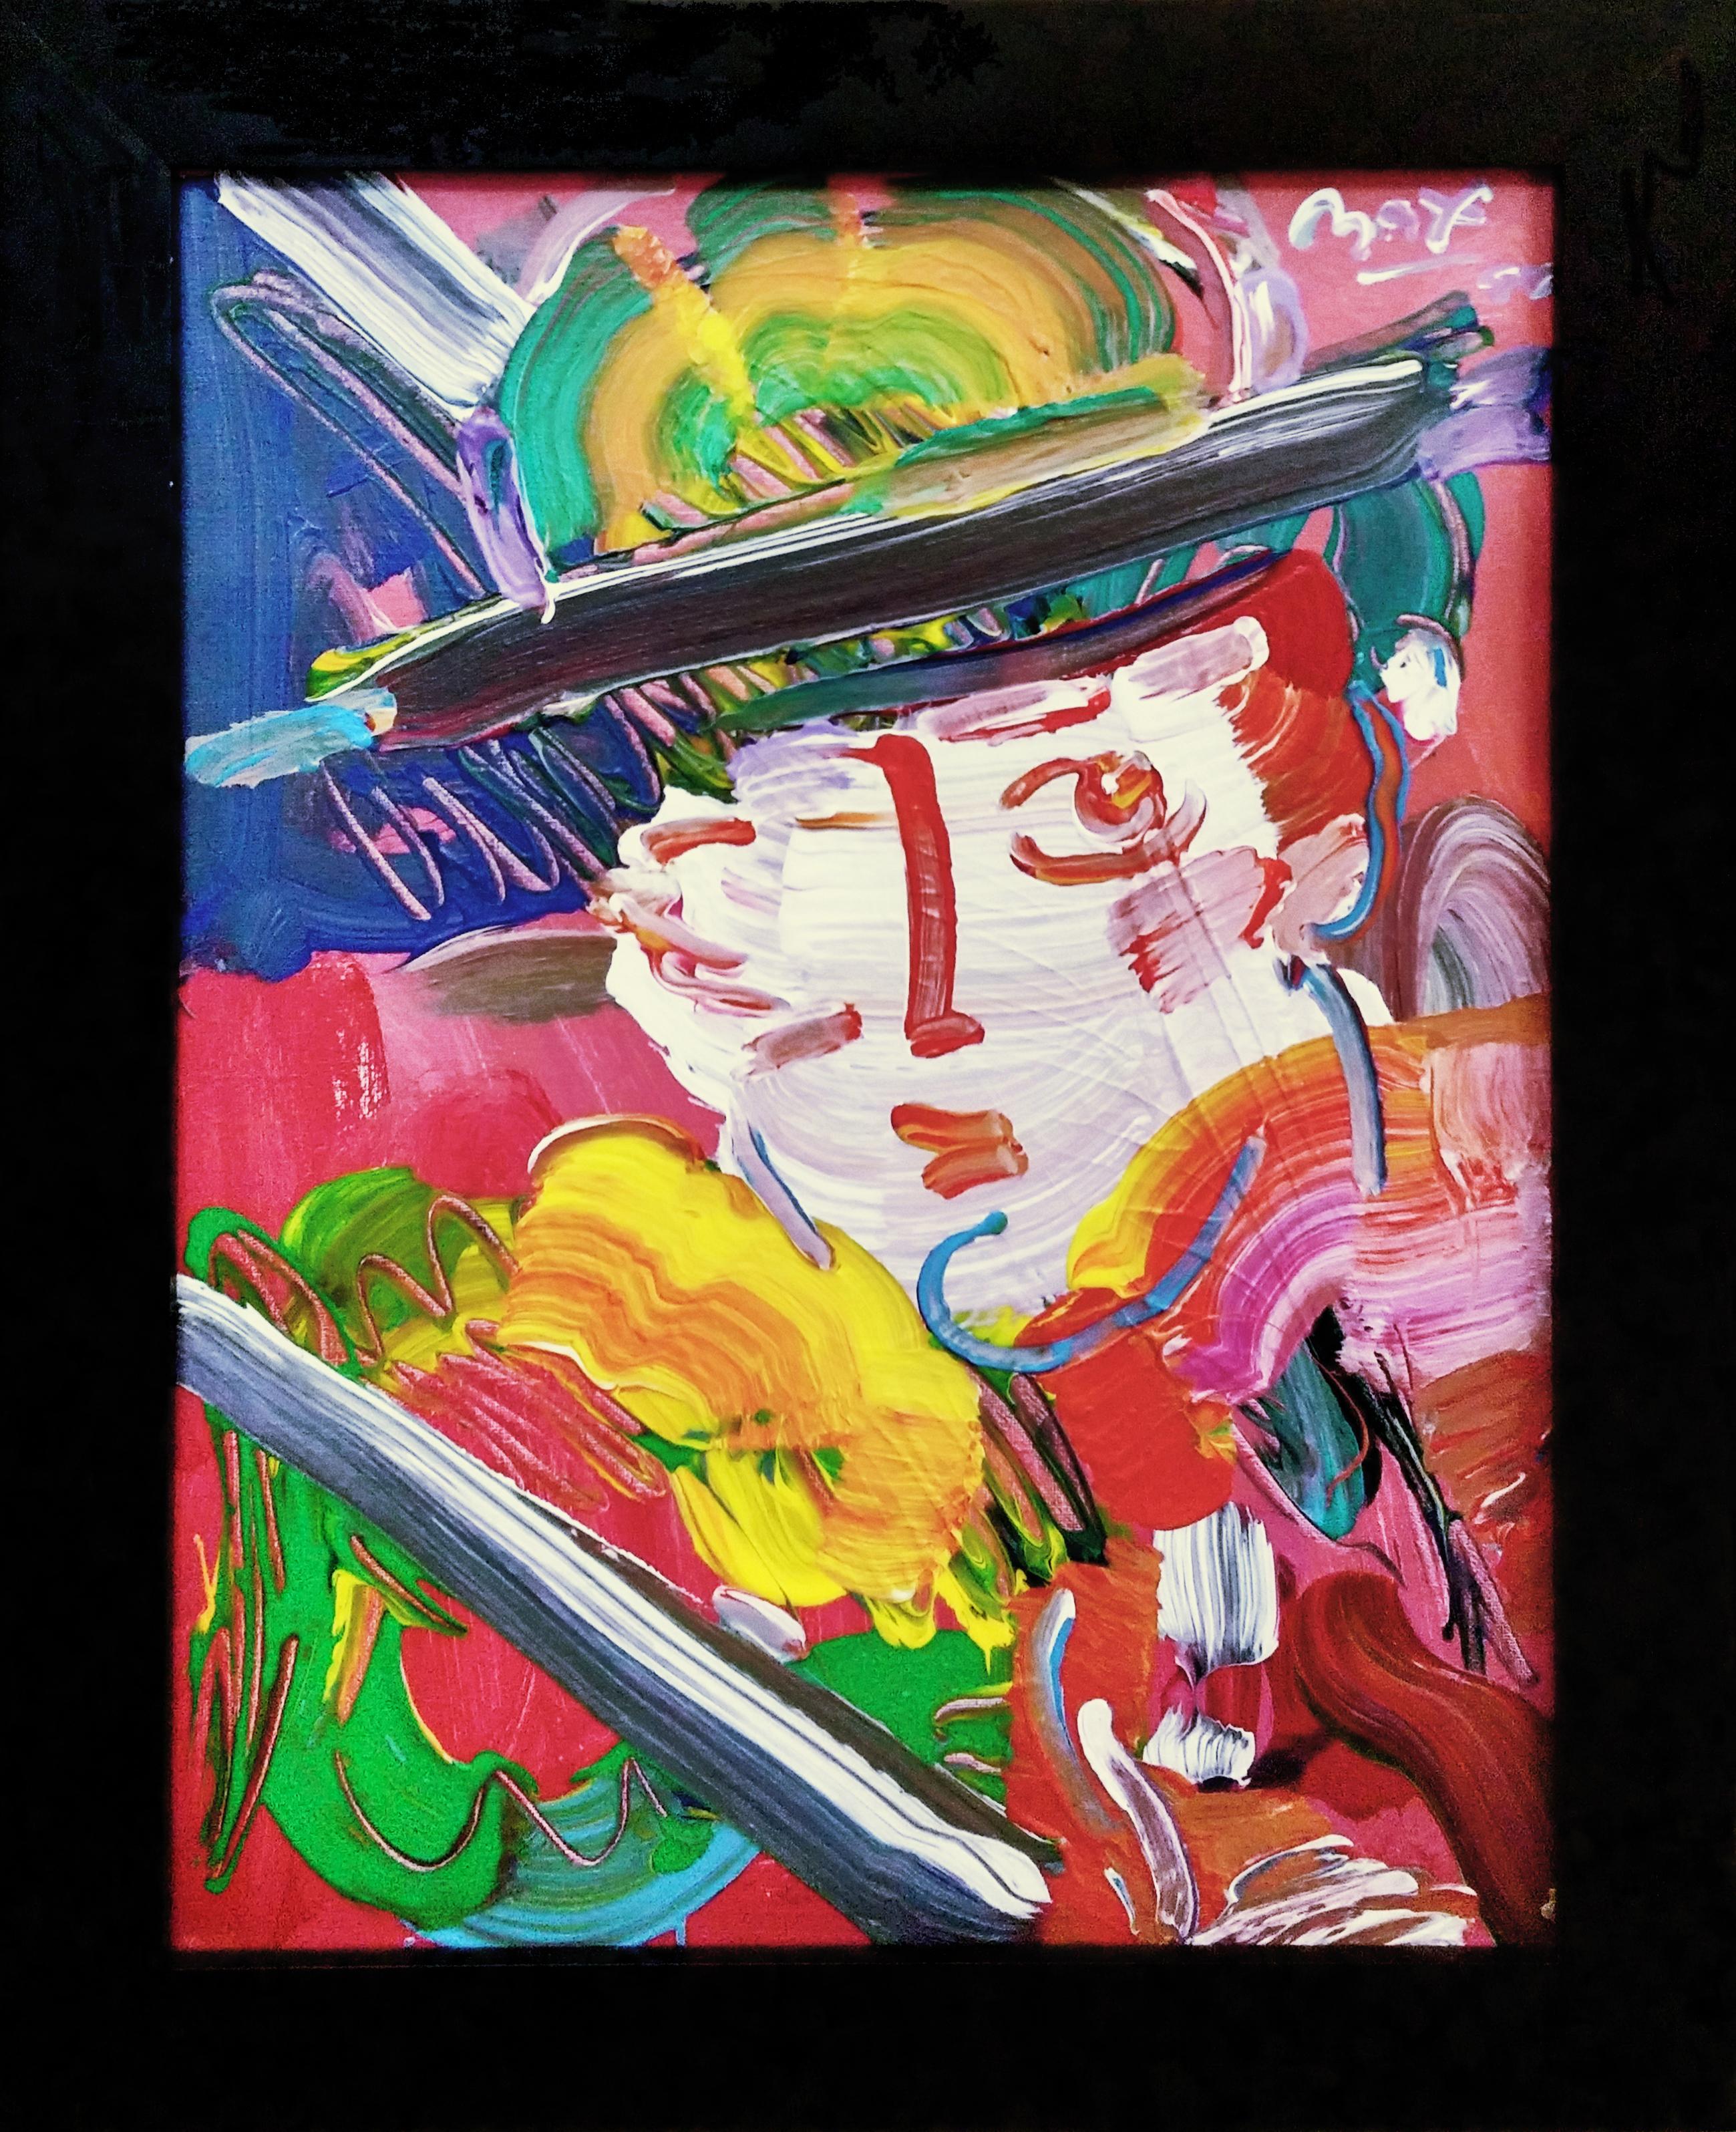 ZERO - Painting by Peter Max